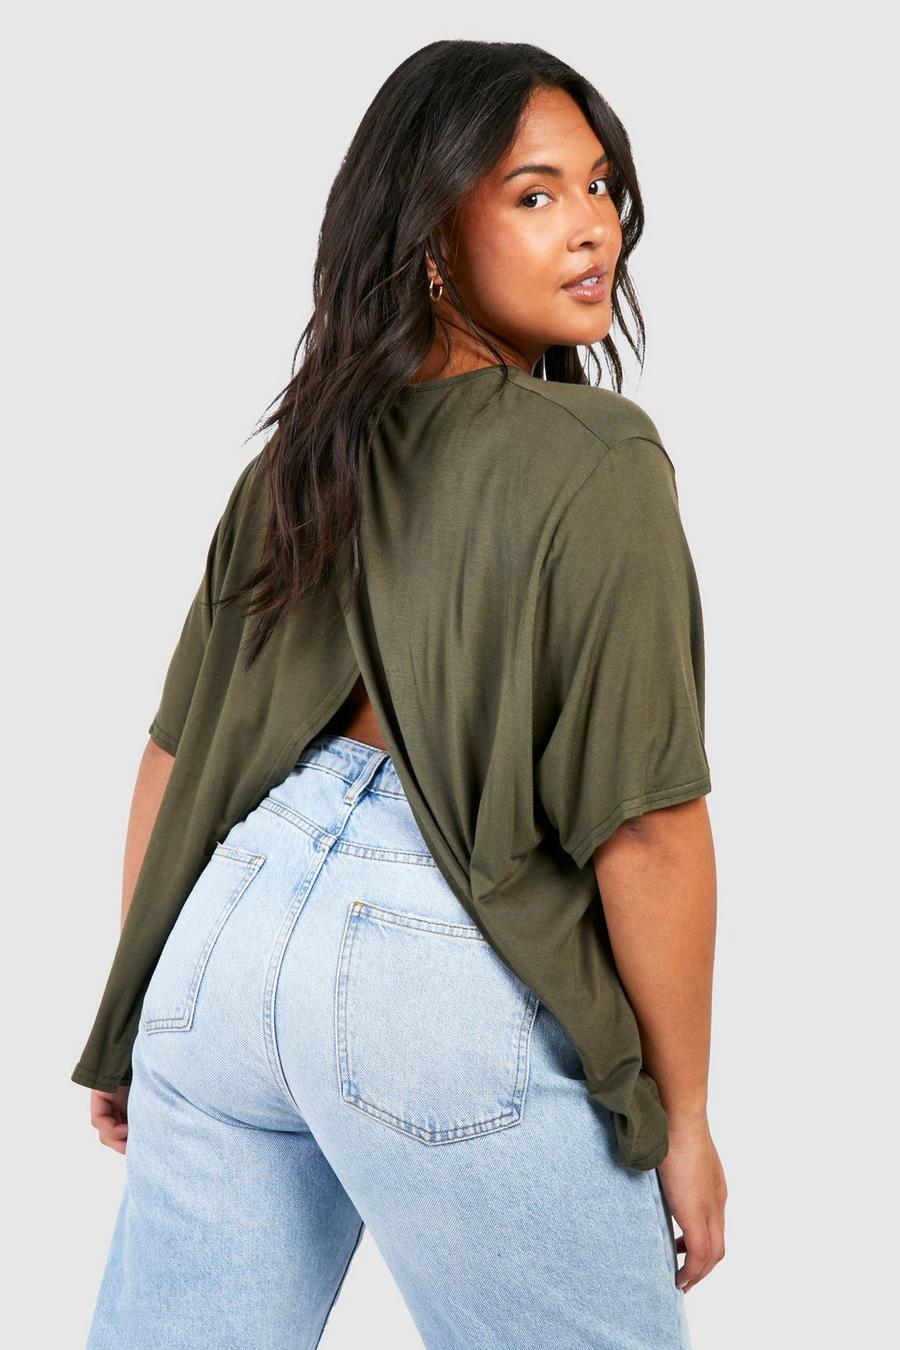 Jersey Knit Plus-Size Tops for Women